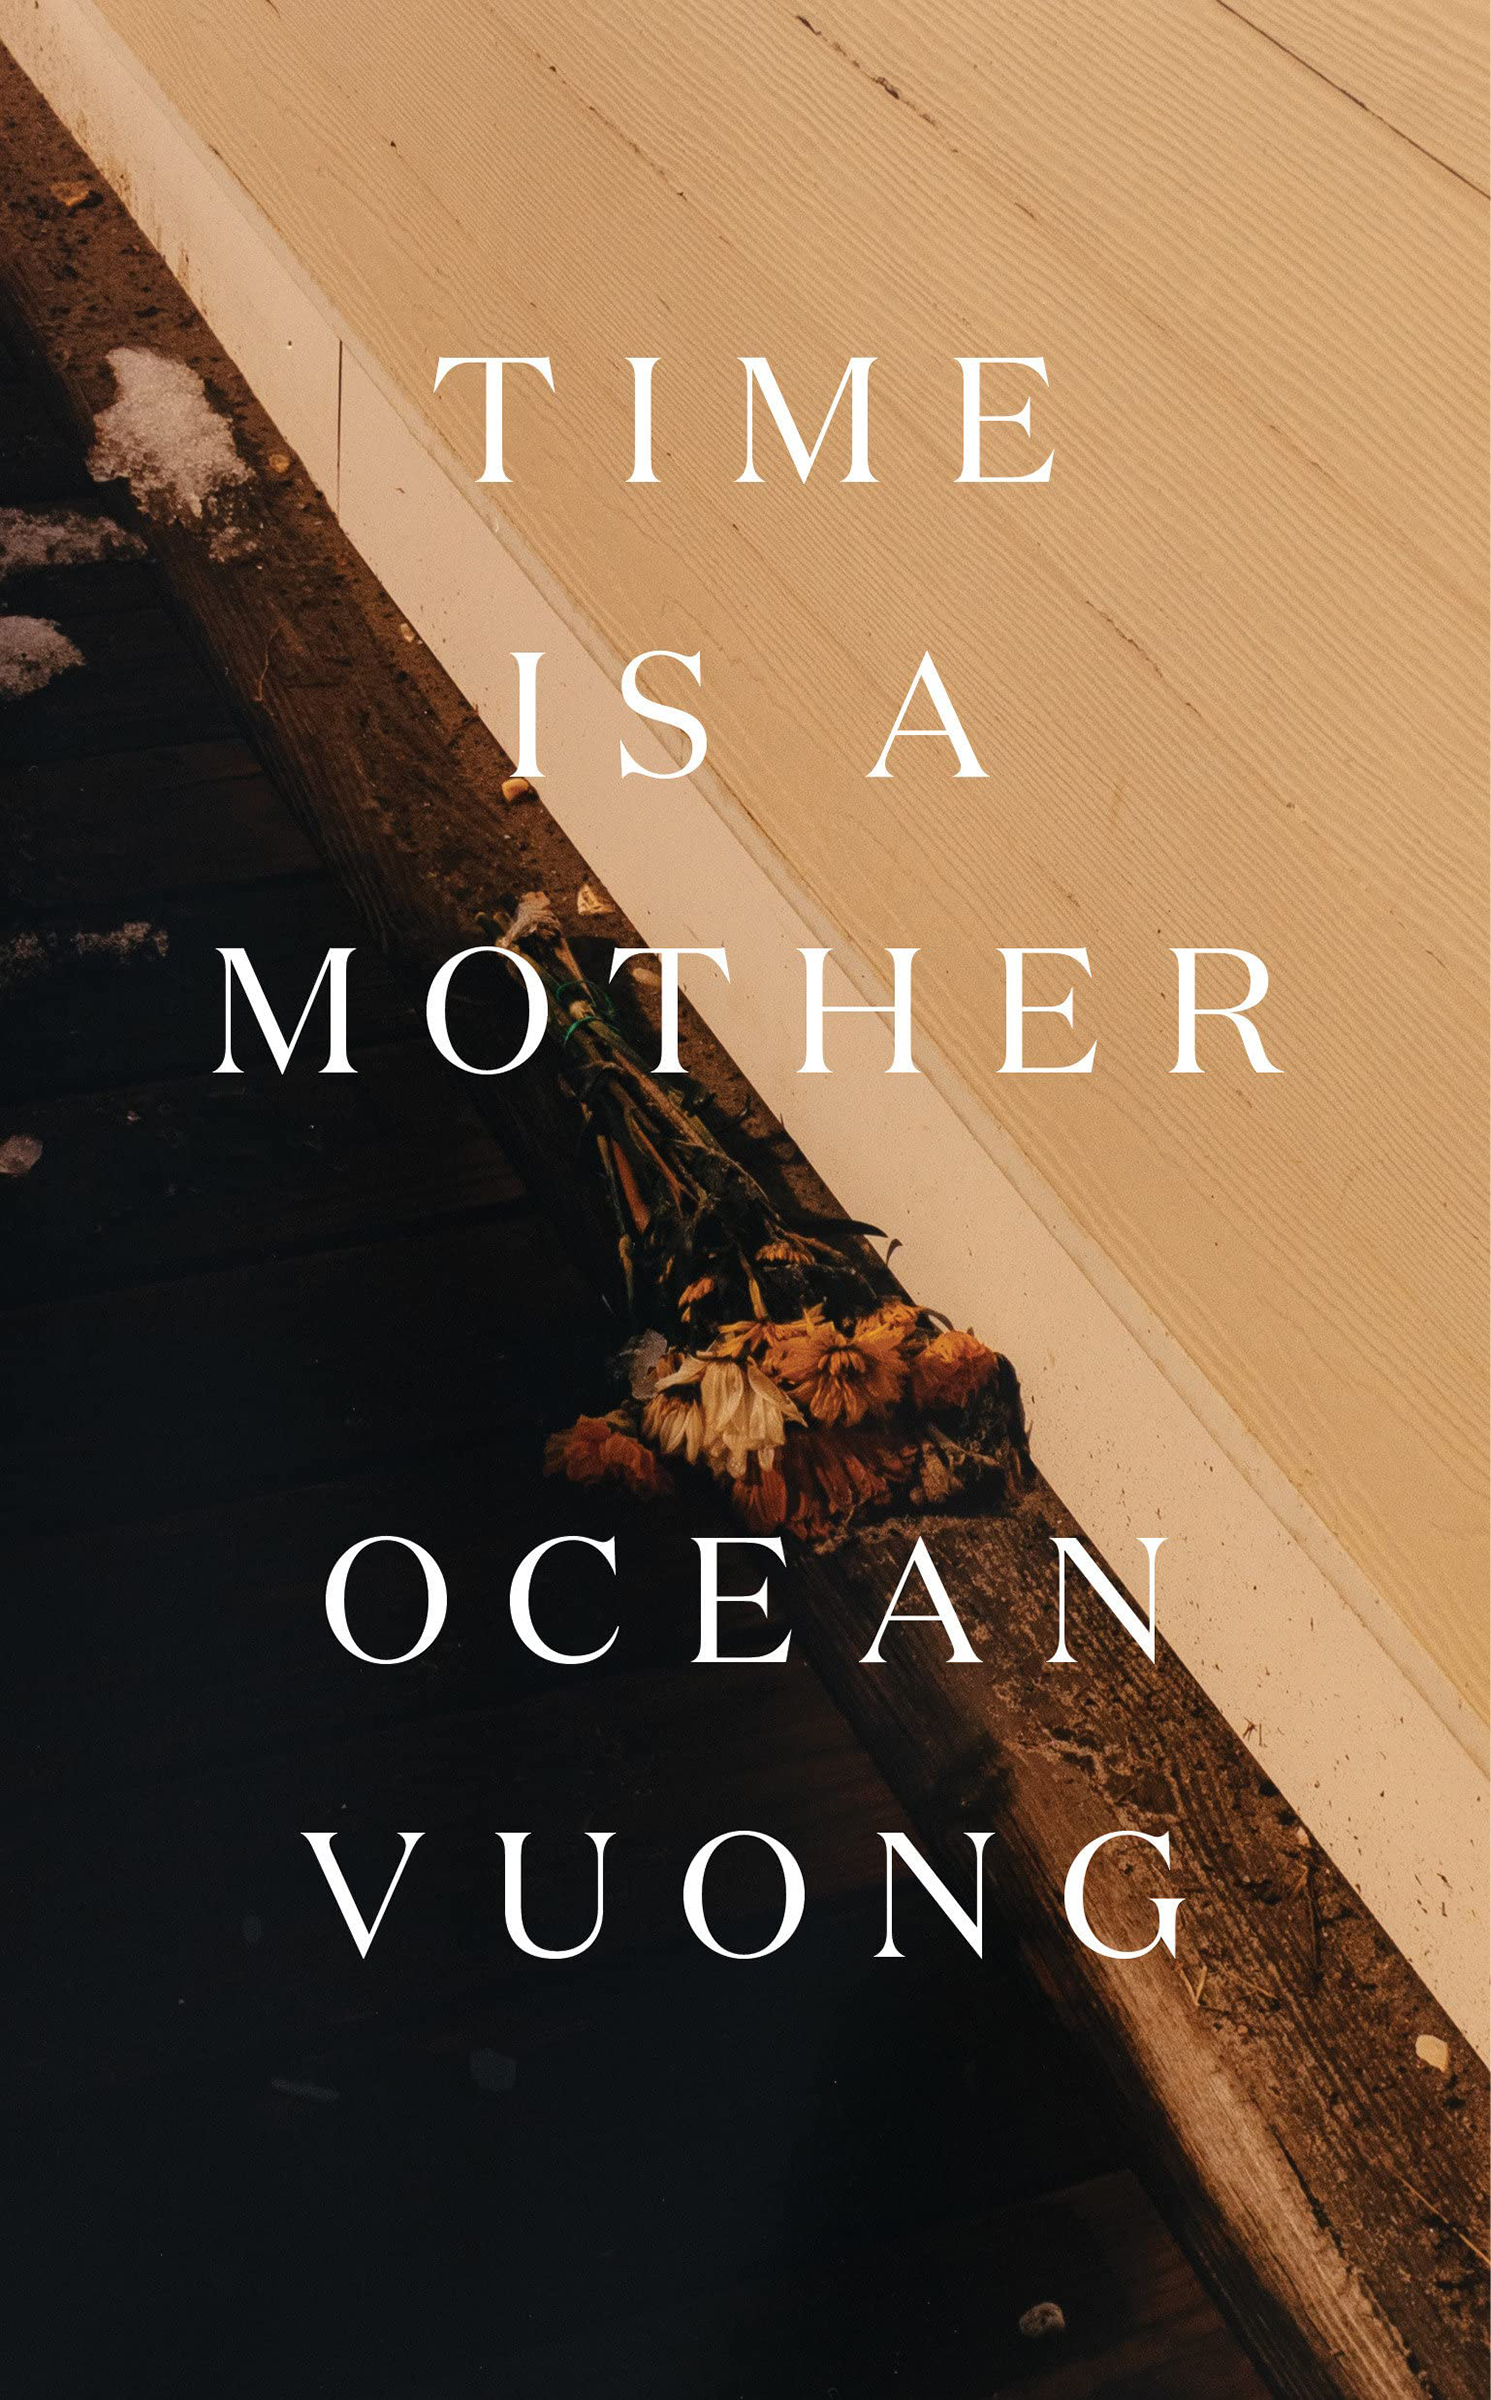 Time Is A Mother book cover by Ocean Vuong